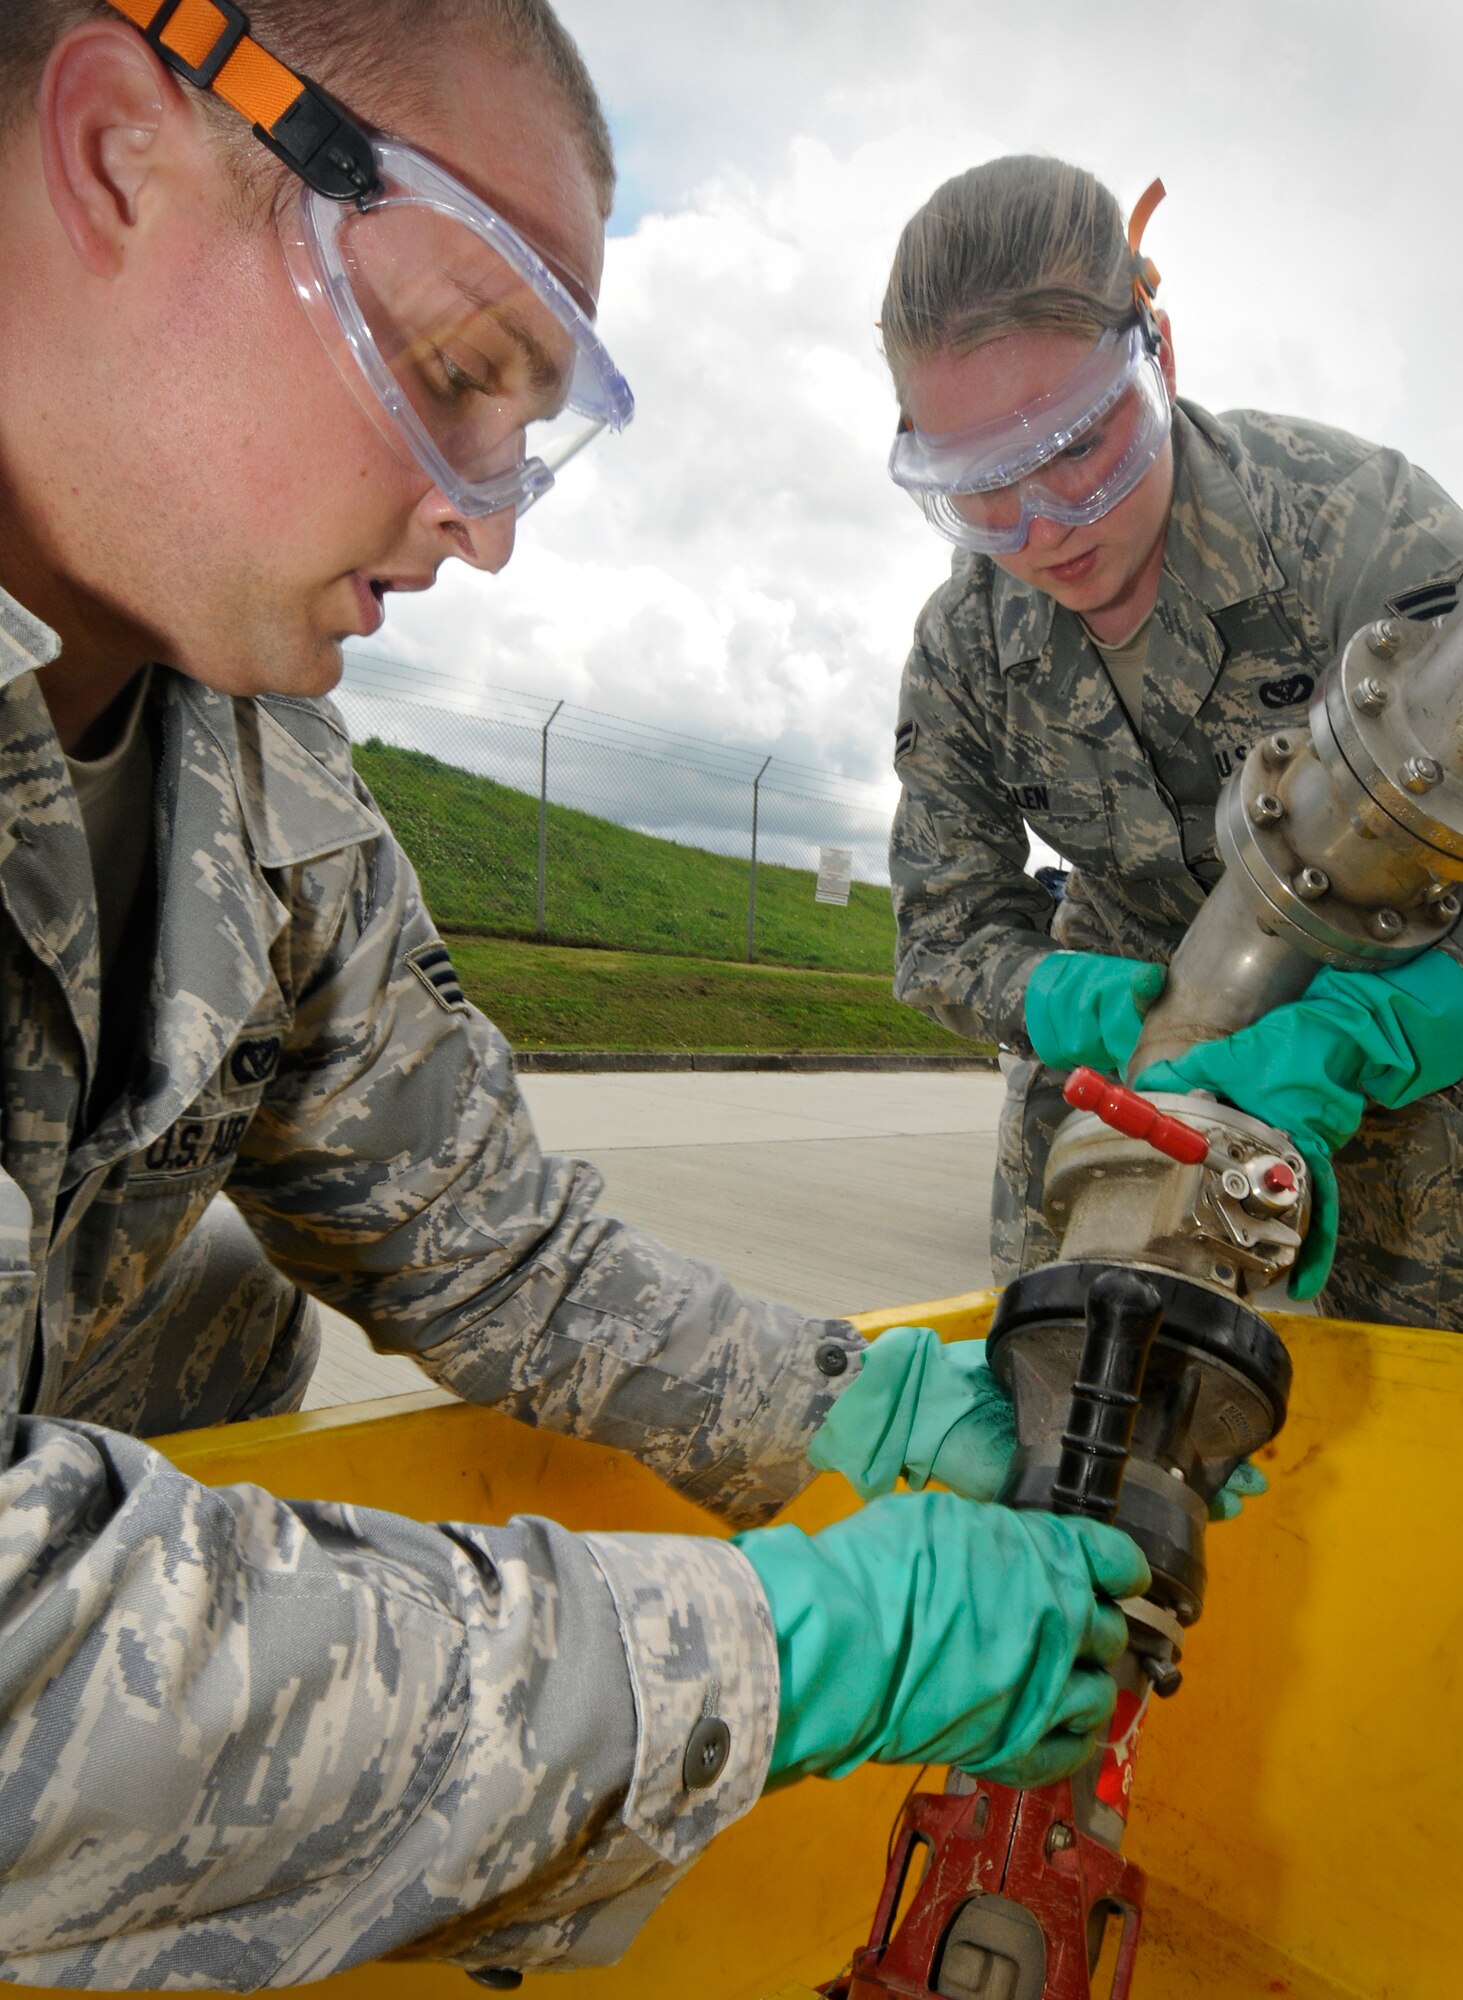 SPANGDAHLEM AIR BASE, Germany – Senior Airman Ivan Alandzak and Airman 1st Class Jennea Allen, 52nd Civil Engineer Squadron, replace a single point nozzle over a drip-pan on one of Spangdahlem Air Base’s truck refueling stands July 23. The 52nd CES Liquid Fuels Flight changes and repairs the nozzles in the event there is damage or a leak. The liquid fuels flight manages 2,300 meters of fuel pipeline, 23 underground fuel tanks and 8.2 million gallons of JP-8. (U.S. Air Force photo by Senior Airman Benjamin Wilson)